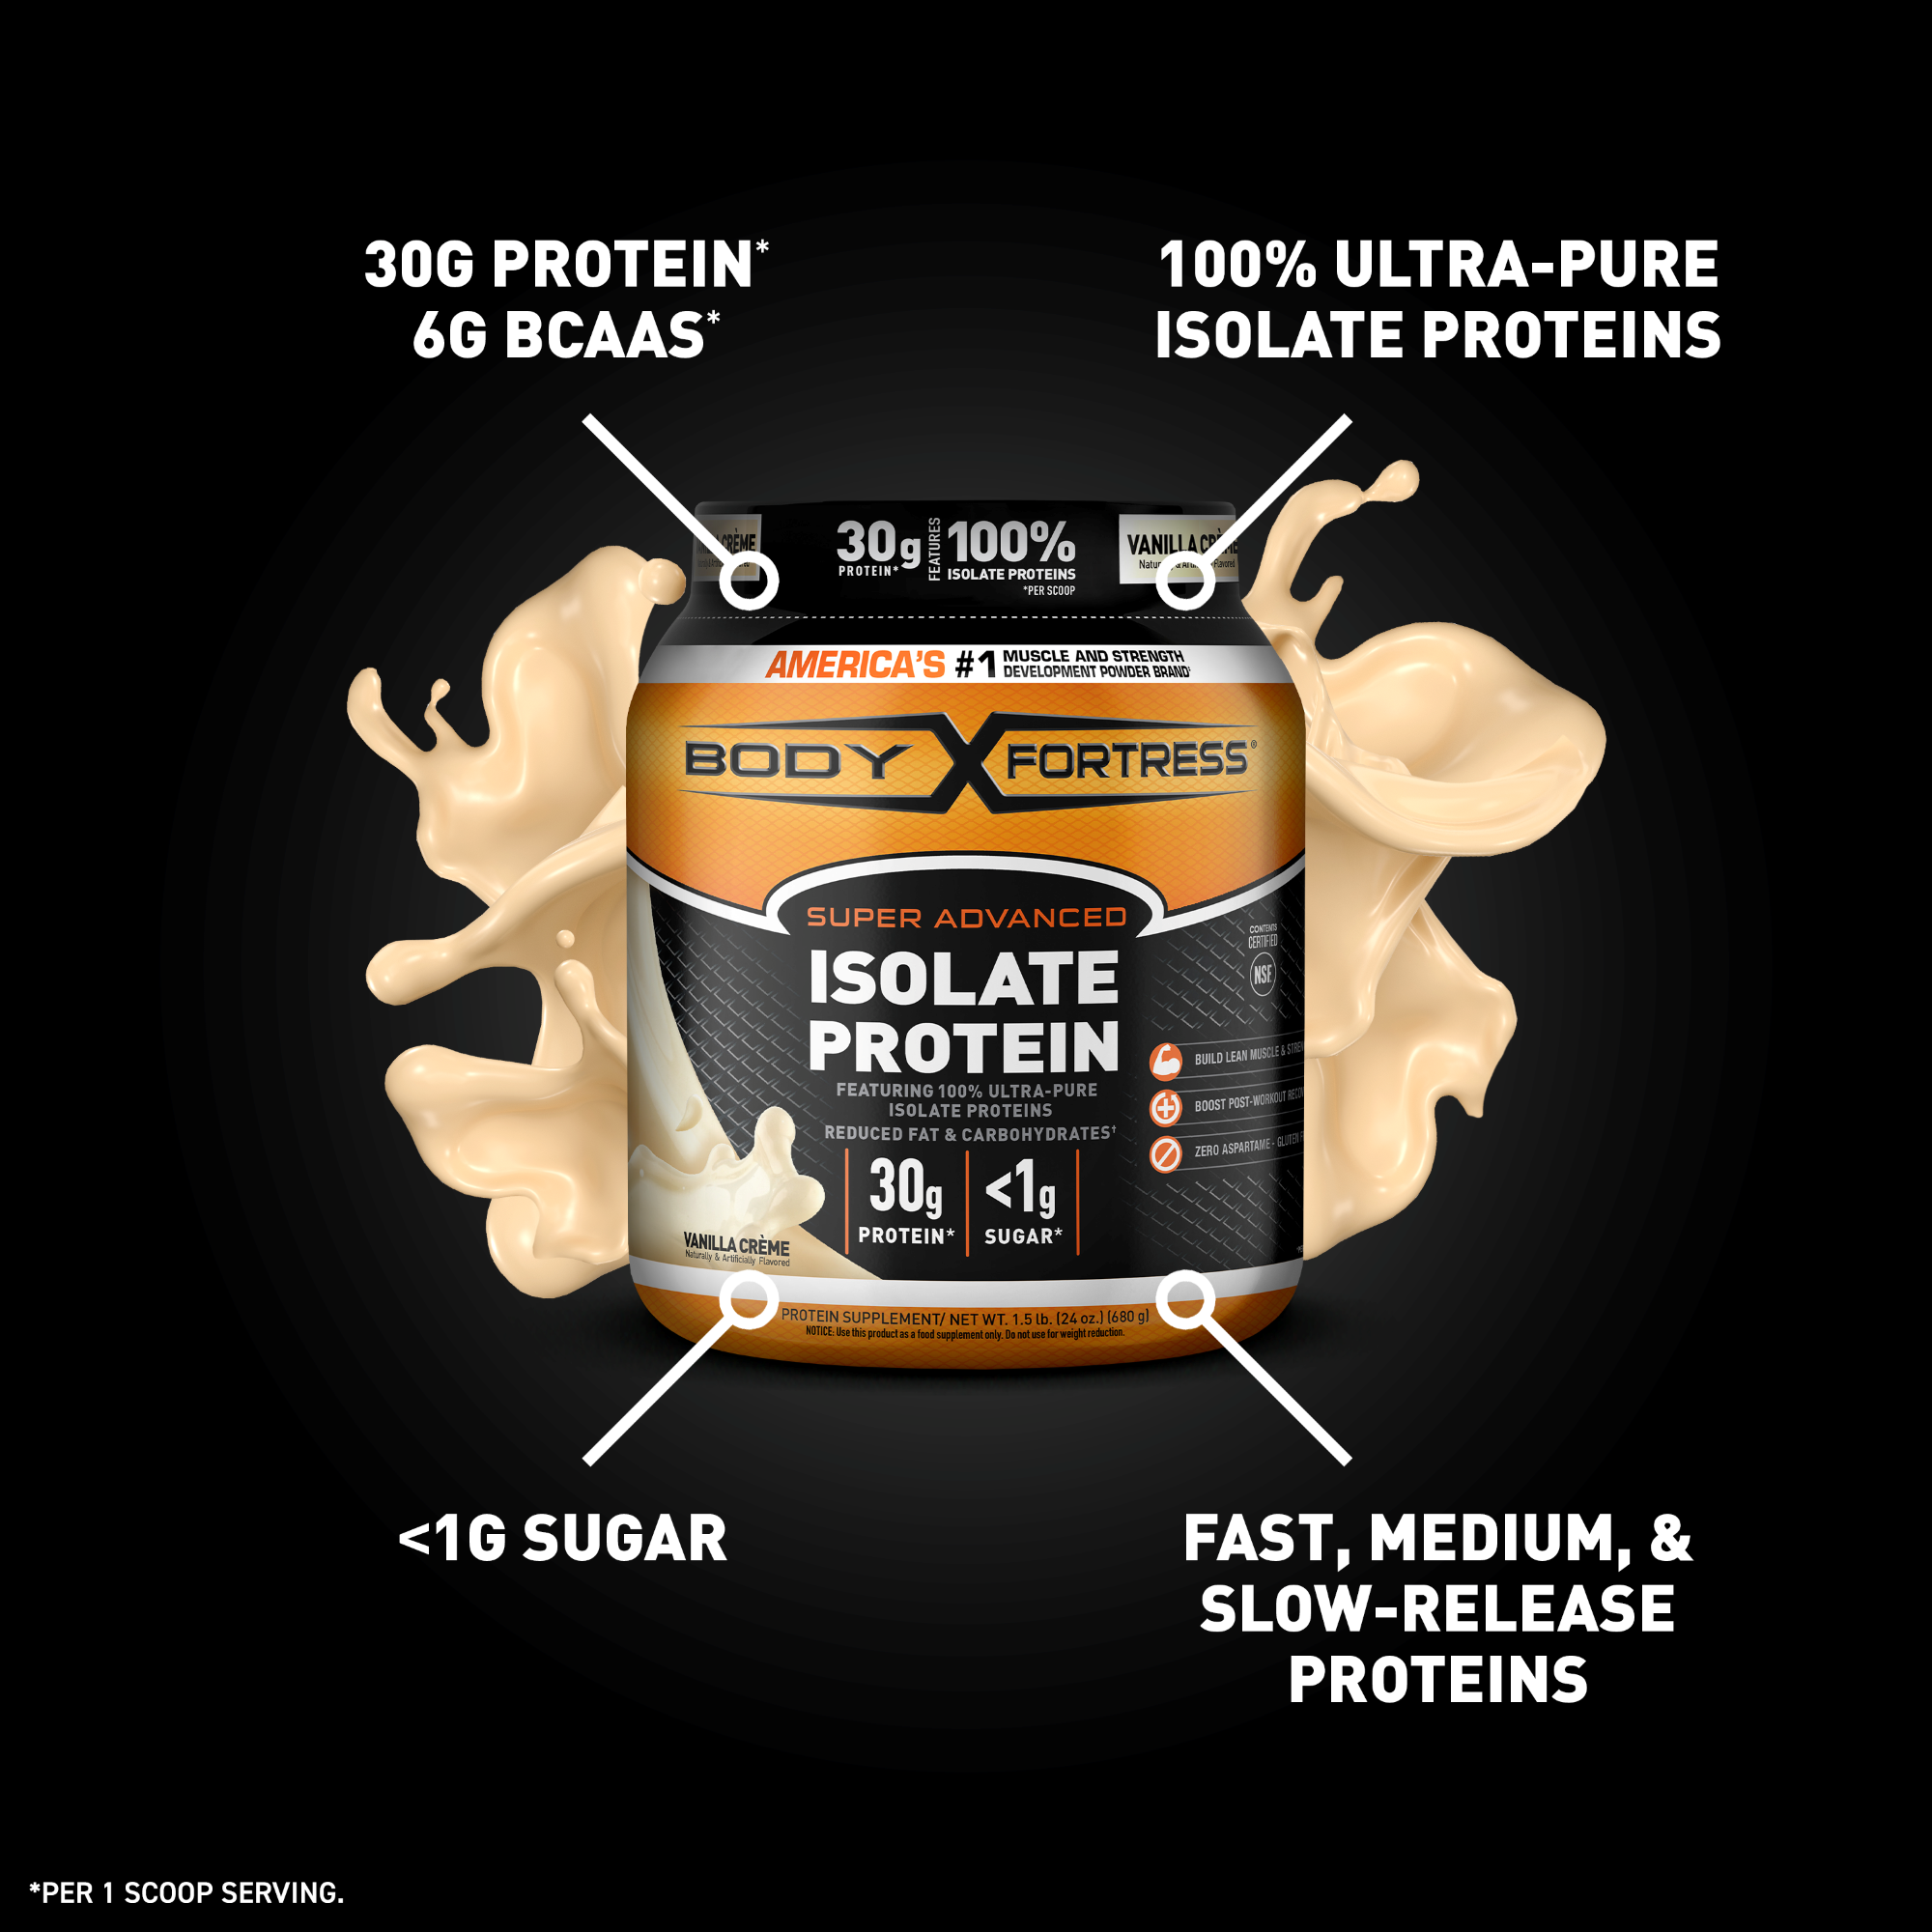 Body Fortress Isolate Powder, 30g Protein per scoop, Vanilla, 1.5 lbs (Packaging May Vary) - image 3 of 6